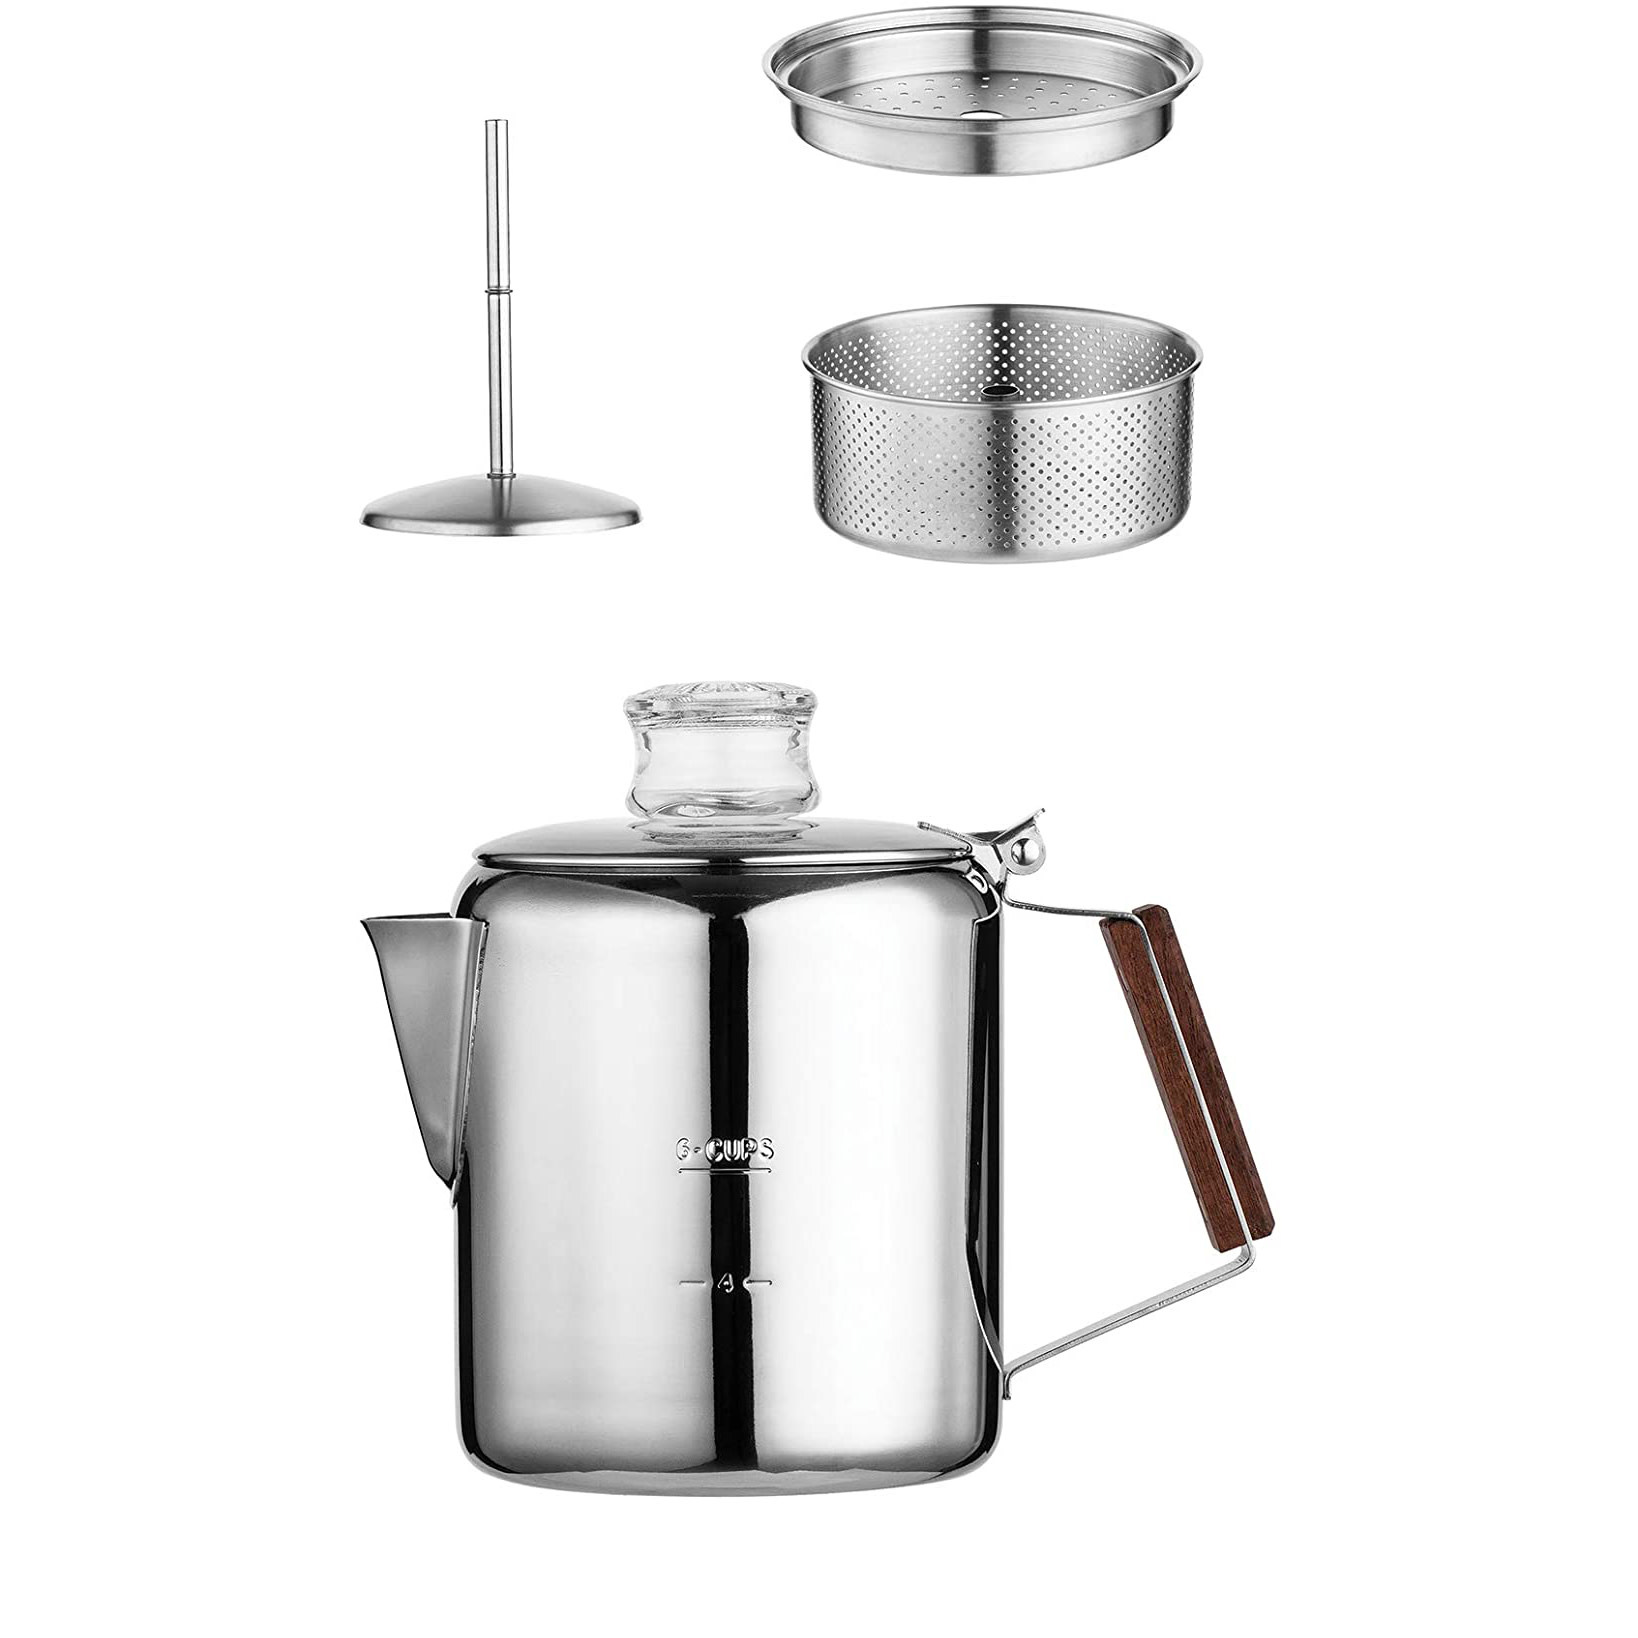 8 Cup Stainless Steel Stovetop Coffee Percolator